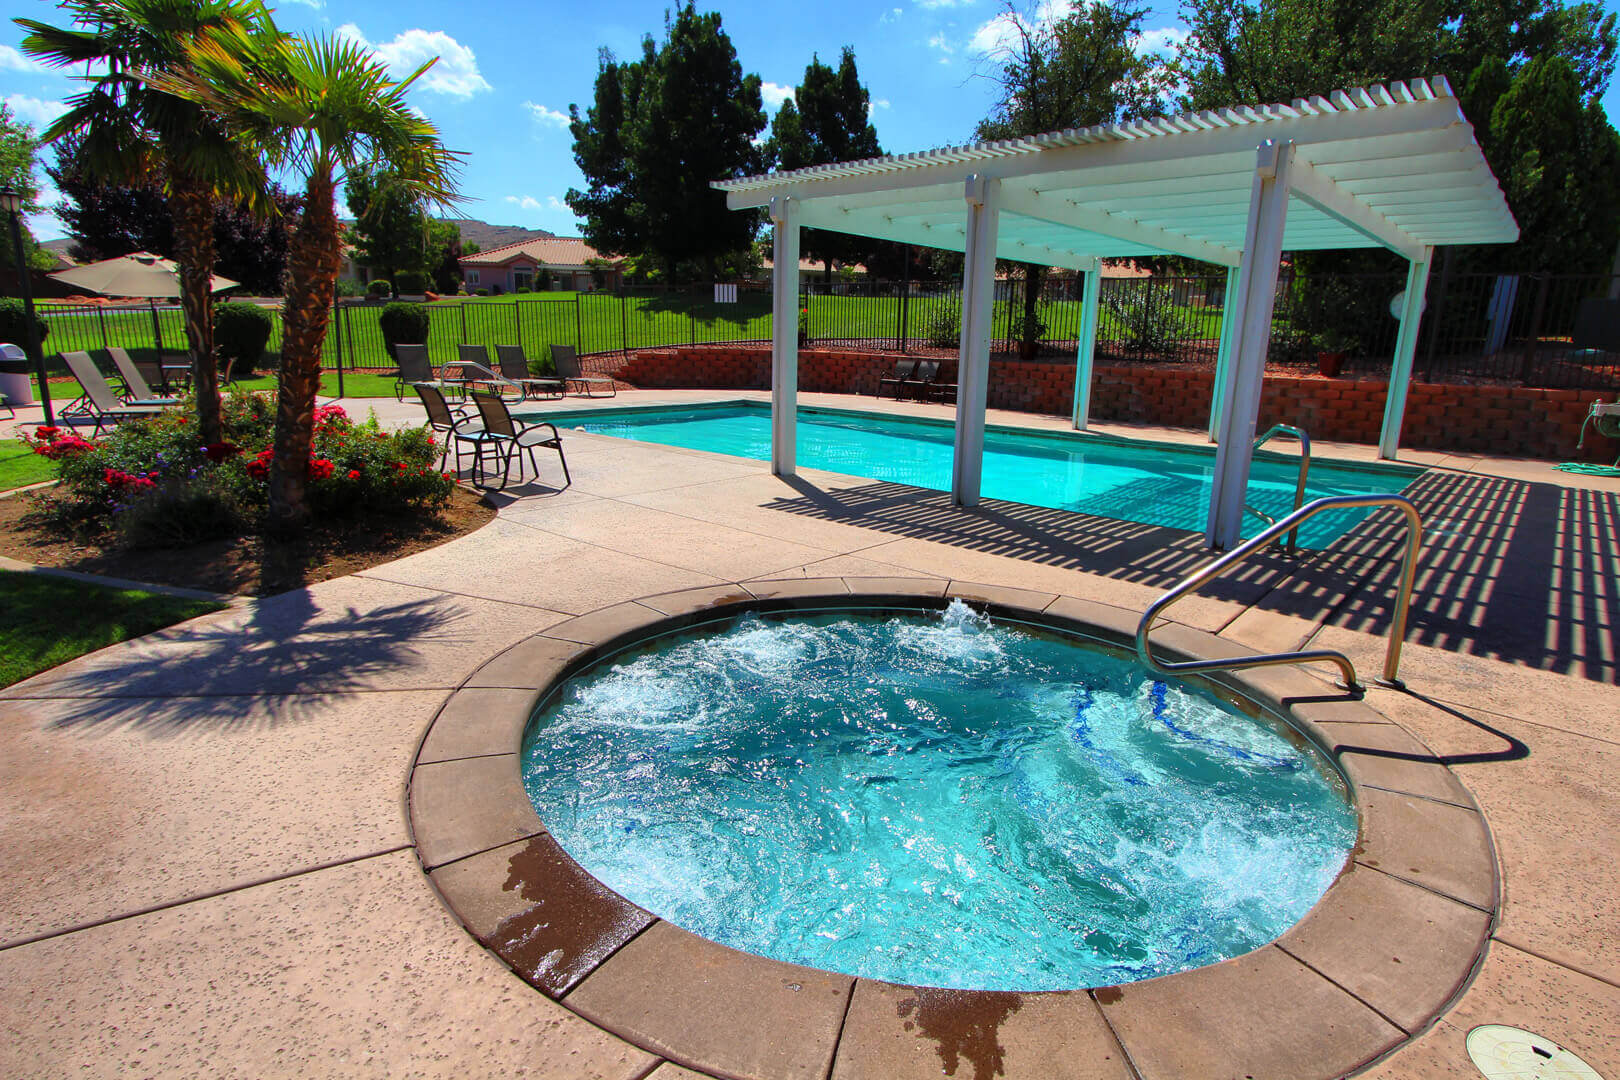 A relaxing outdoor Jacuzzi tub at VRI's Villas at South Gate in St. George, Utah.